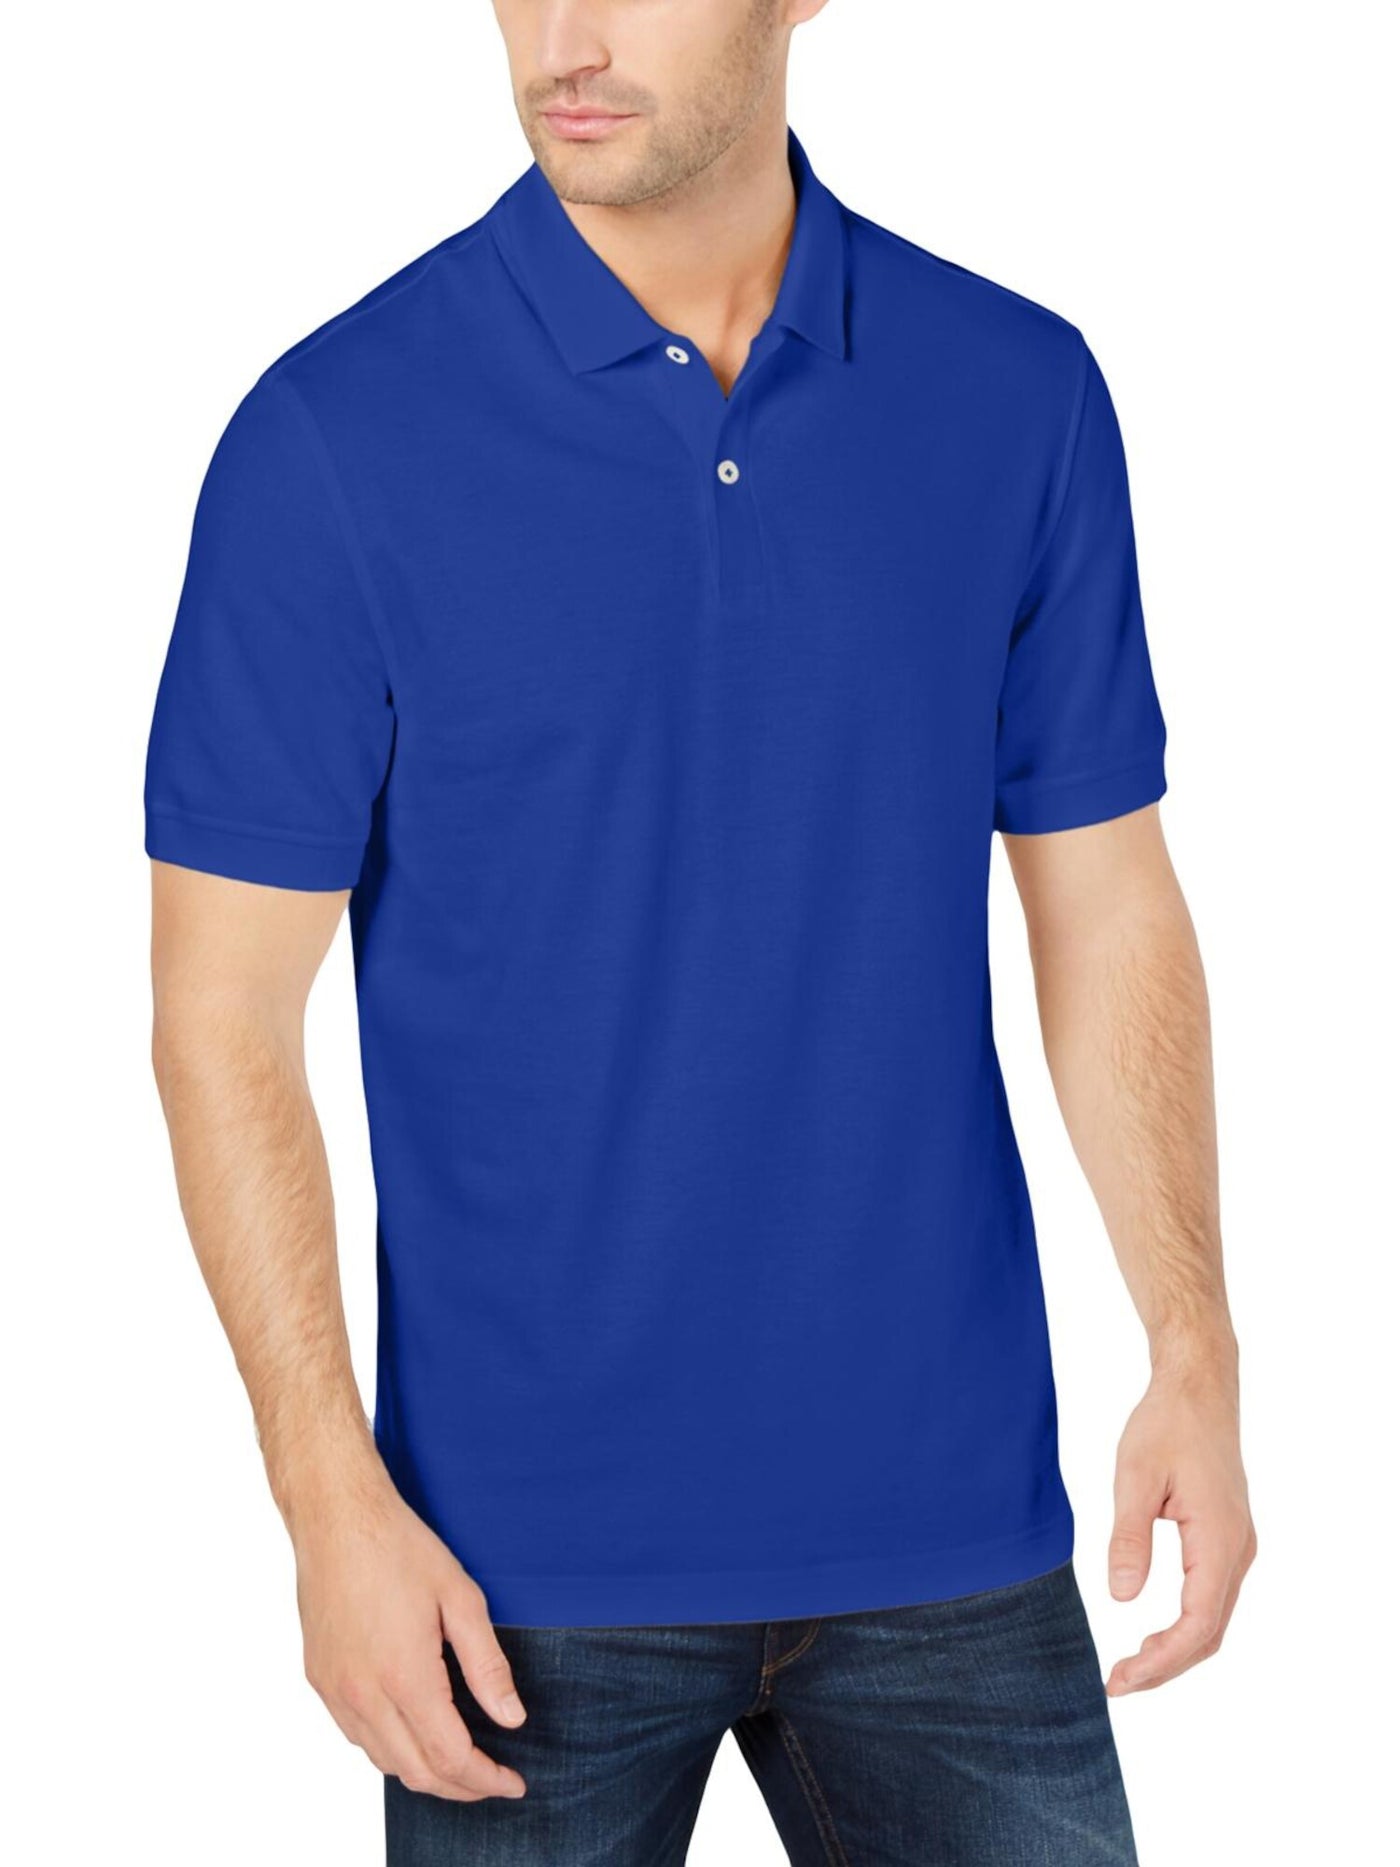 CLUBROOM Mens Blue Classic Fit Button Down Cotton Polo S